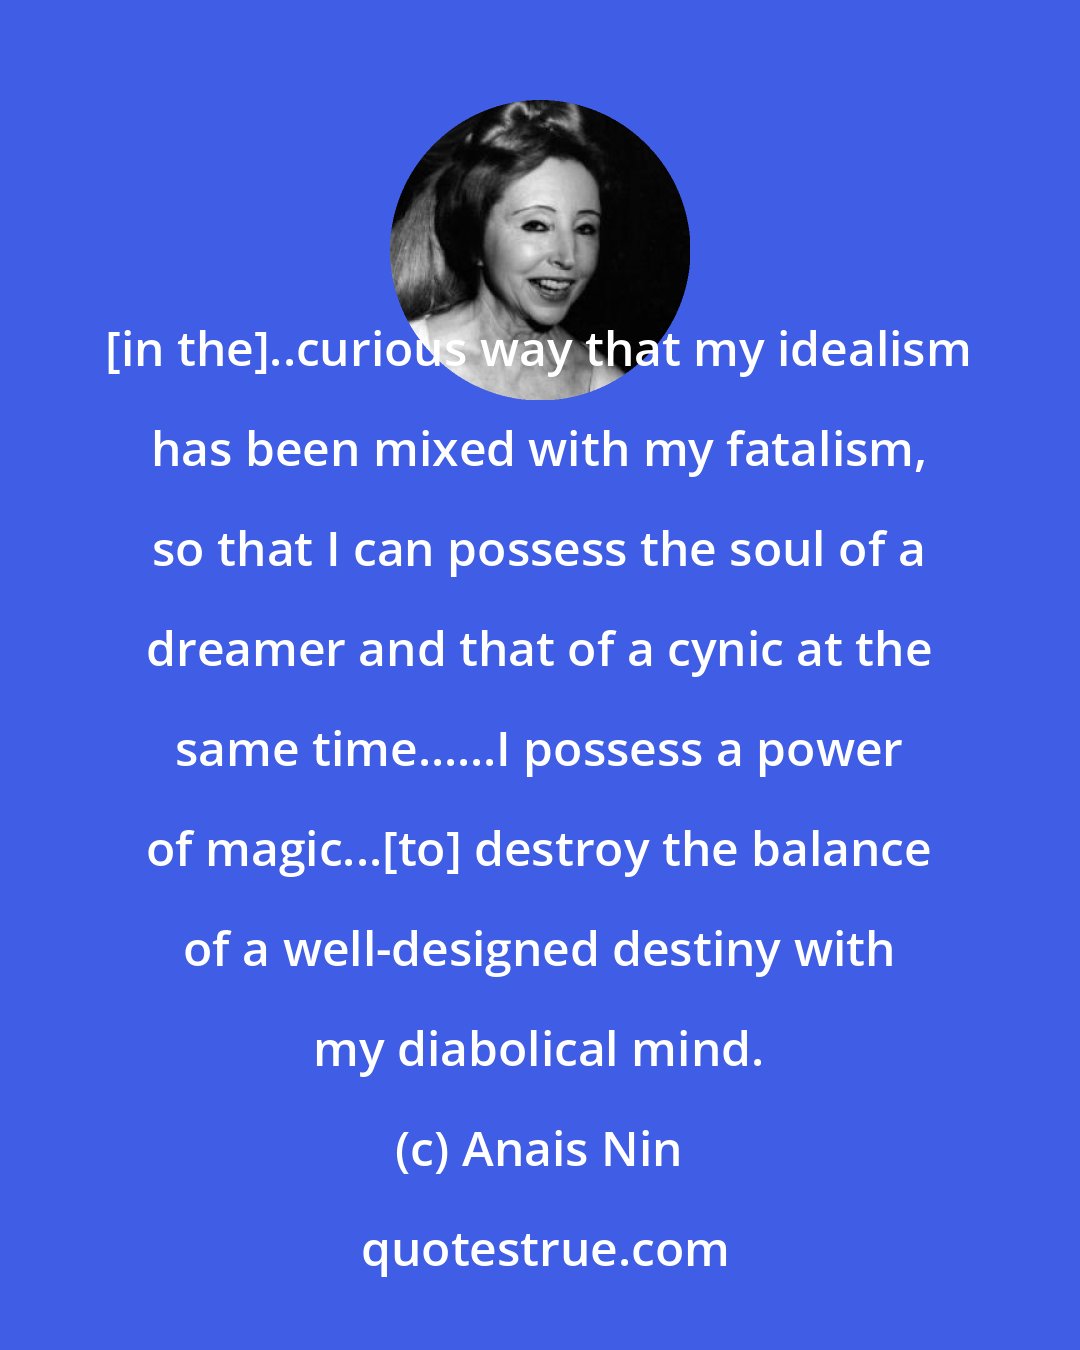 Anais Nin: [in the]..curious way that my idealism has been mixed with my fatalism, so that I can possess the soul of a dreamer and that of a cynic at the same time......I possess a power of magic...[to] destroy the balance of a well-designed destiny with my diabolical mind.